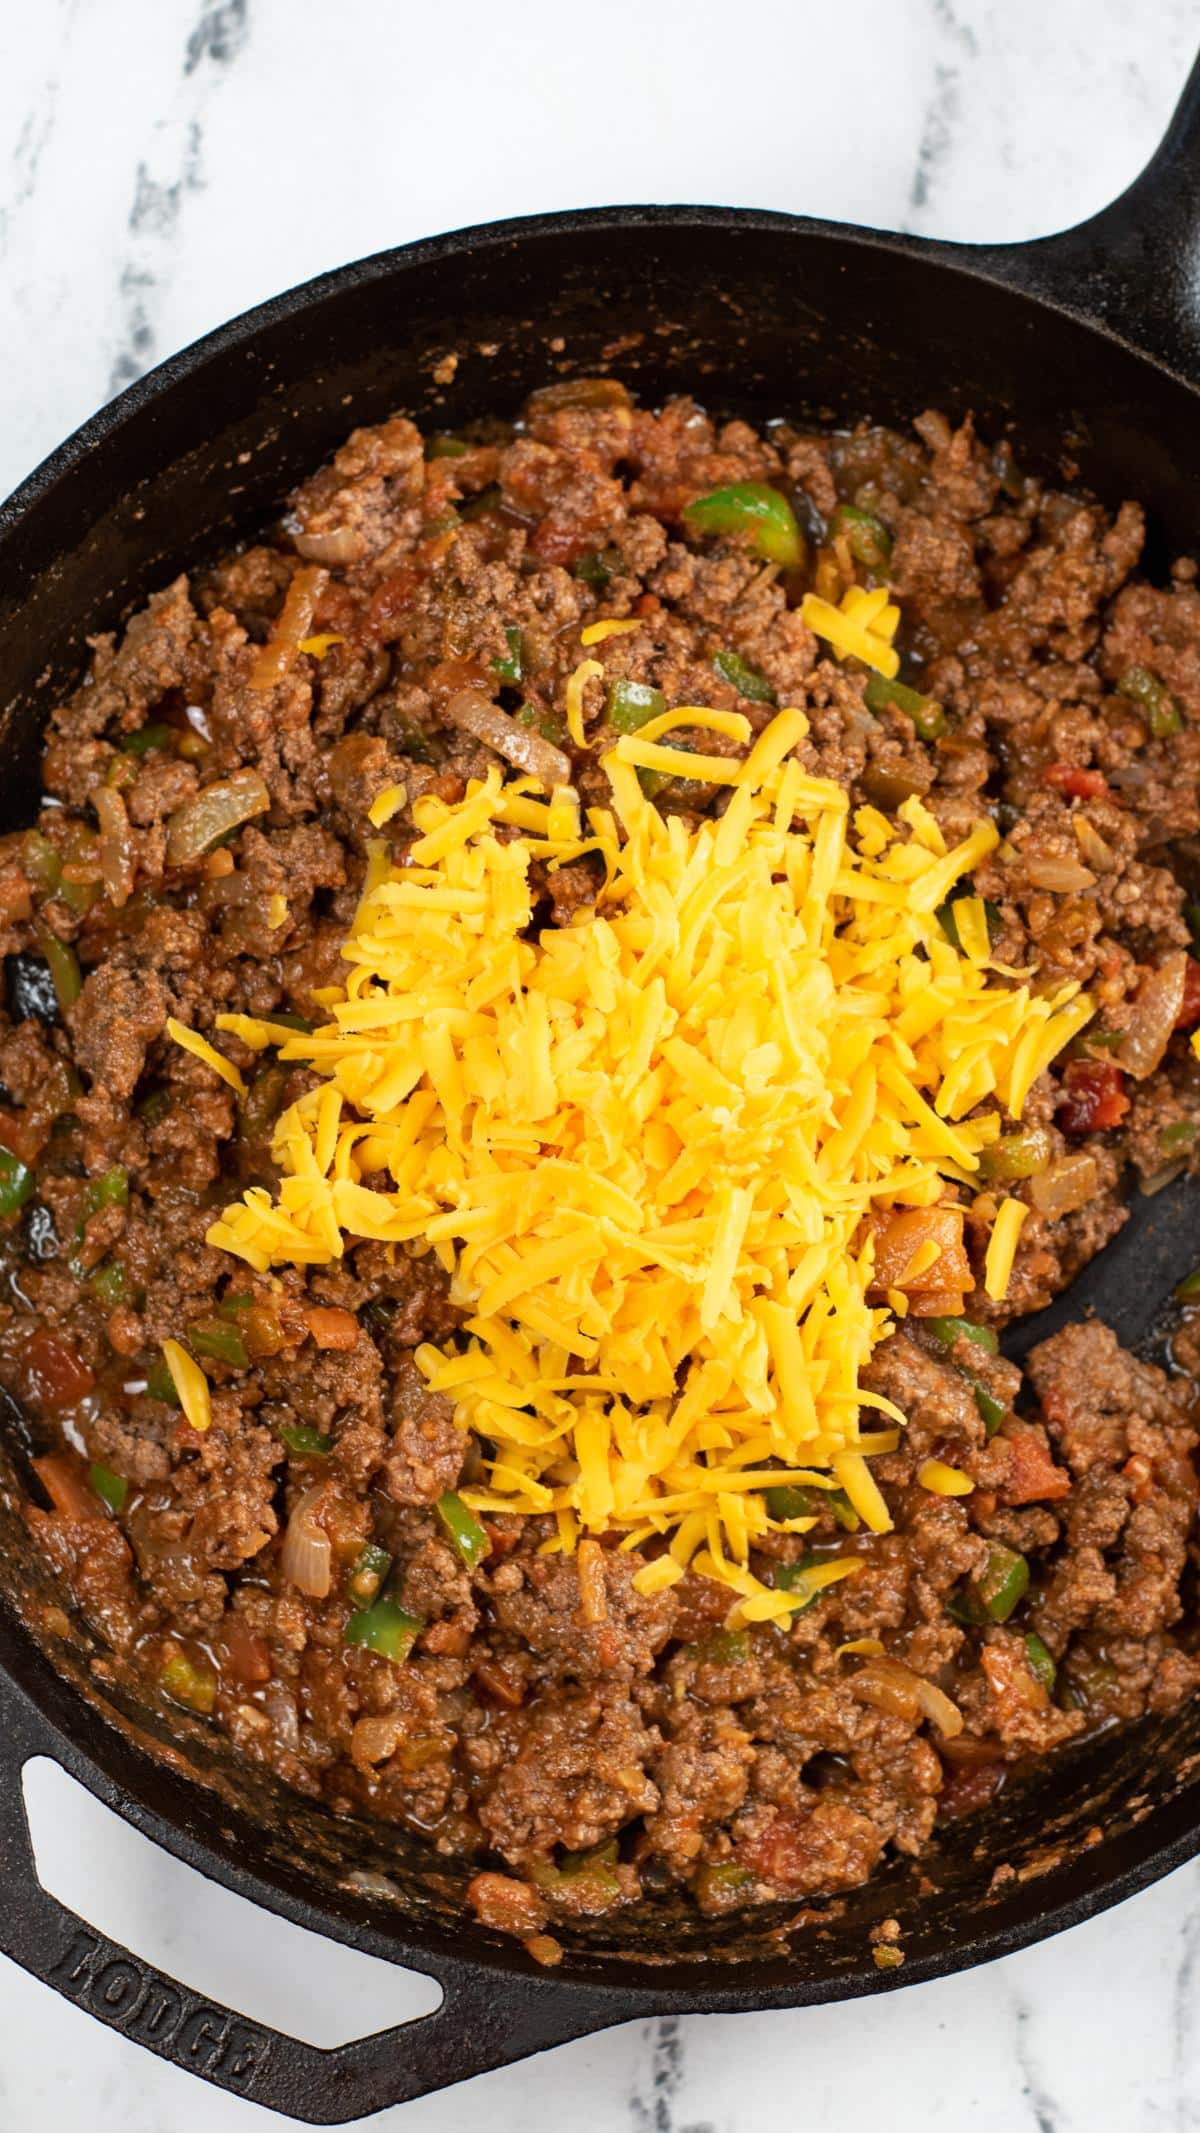 Shredded cheese added to meat mixture.